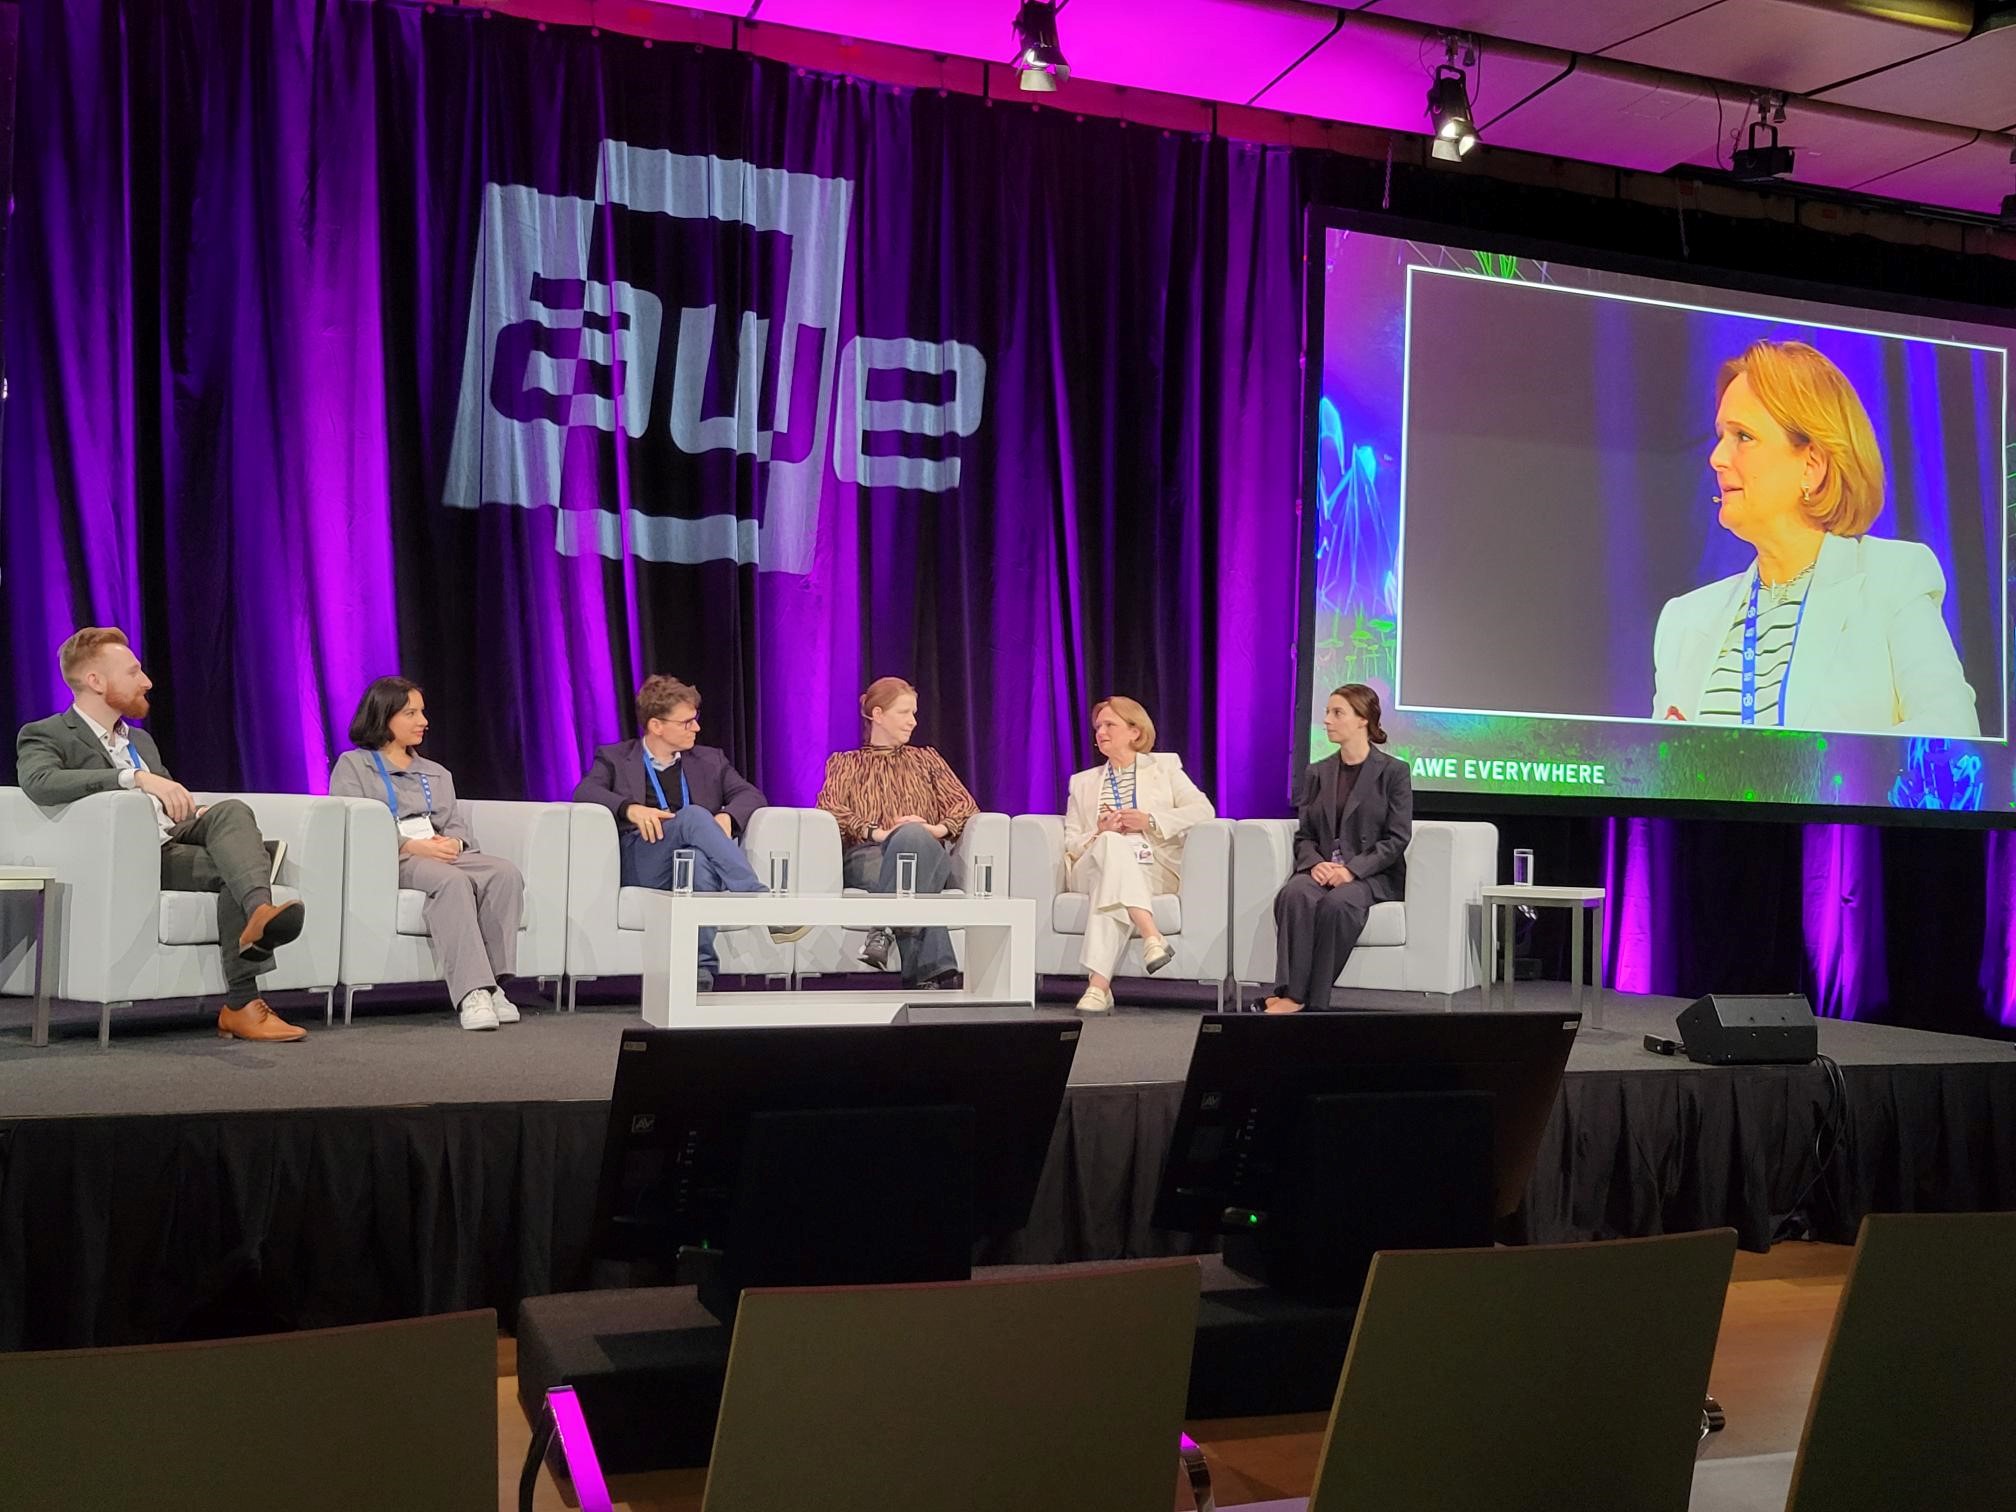 XRA’S SENIOR VP OF PUBLIC POLICY PARTICIPATED IN MAIN STAGE PANEL DISCUSSION AT AWE EU